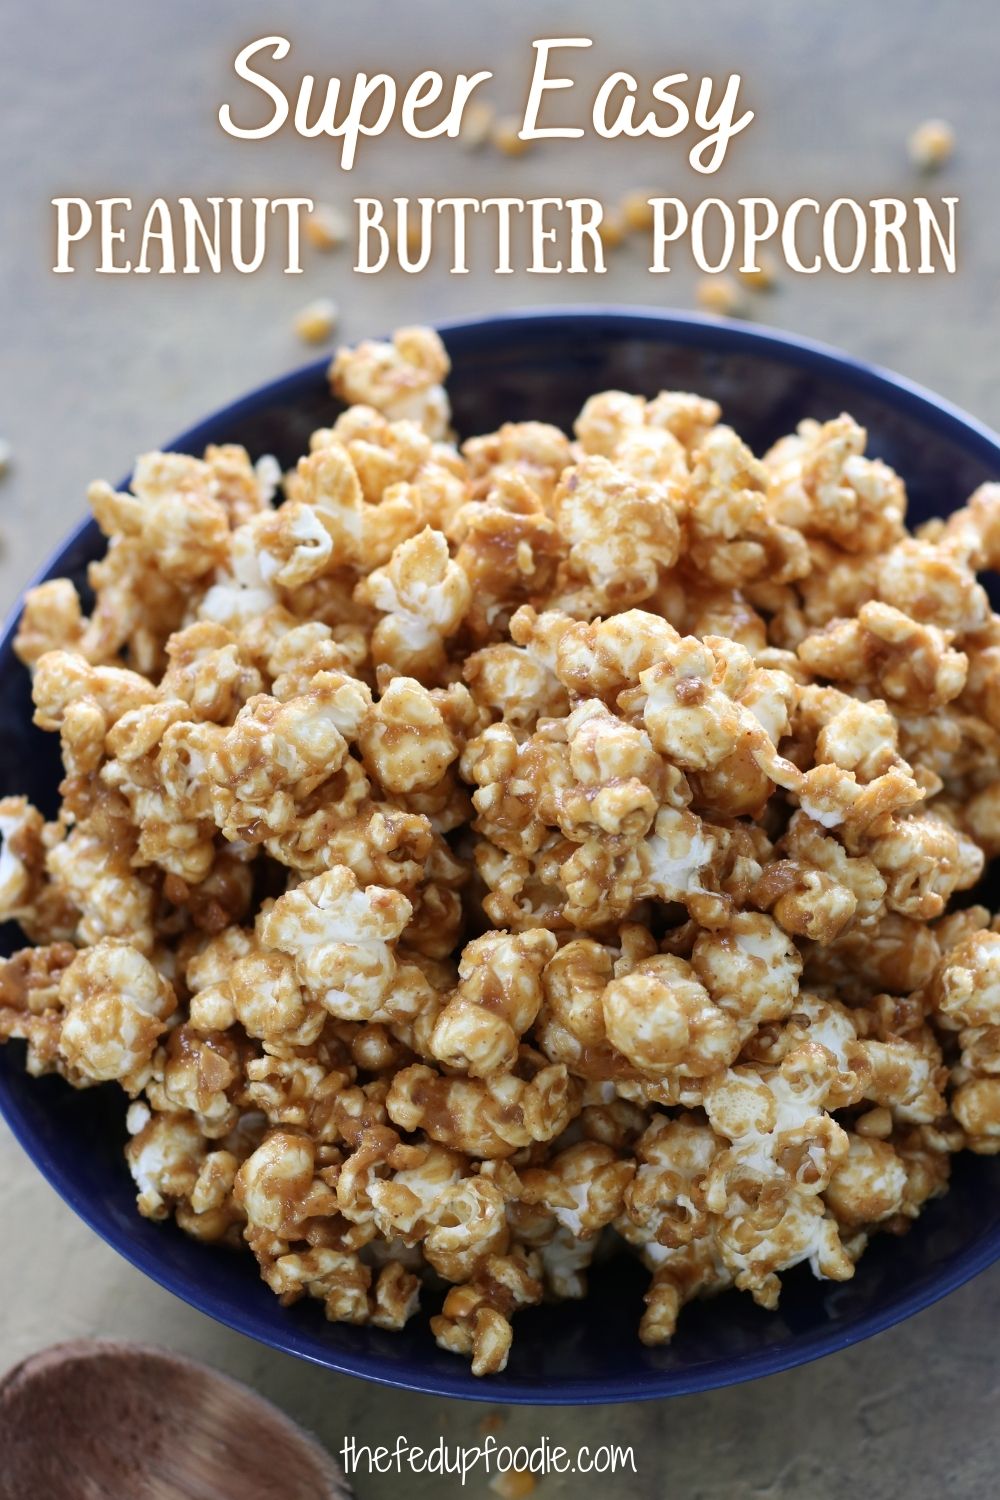 Peanut Butter Popcorn is a super easy treat that is wonderful for the holidays or as an evening dessert. Made with honey and no corn syrup, this is a healthy popcorn recipe that feels very gourmet. 
#PeanutButterPopcorn #PeanutButterPopcornHealthy #FallPopcorn #GourmetPopcornRecipes #HolidayPopcornRecipes #FallPopcornTreats